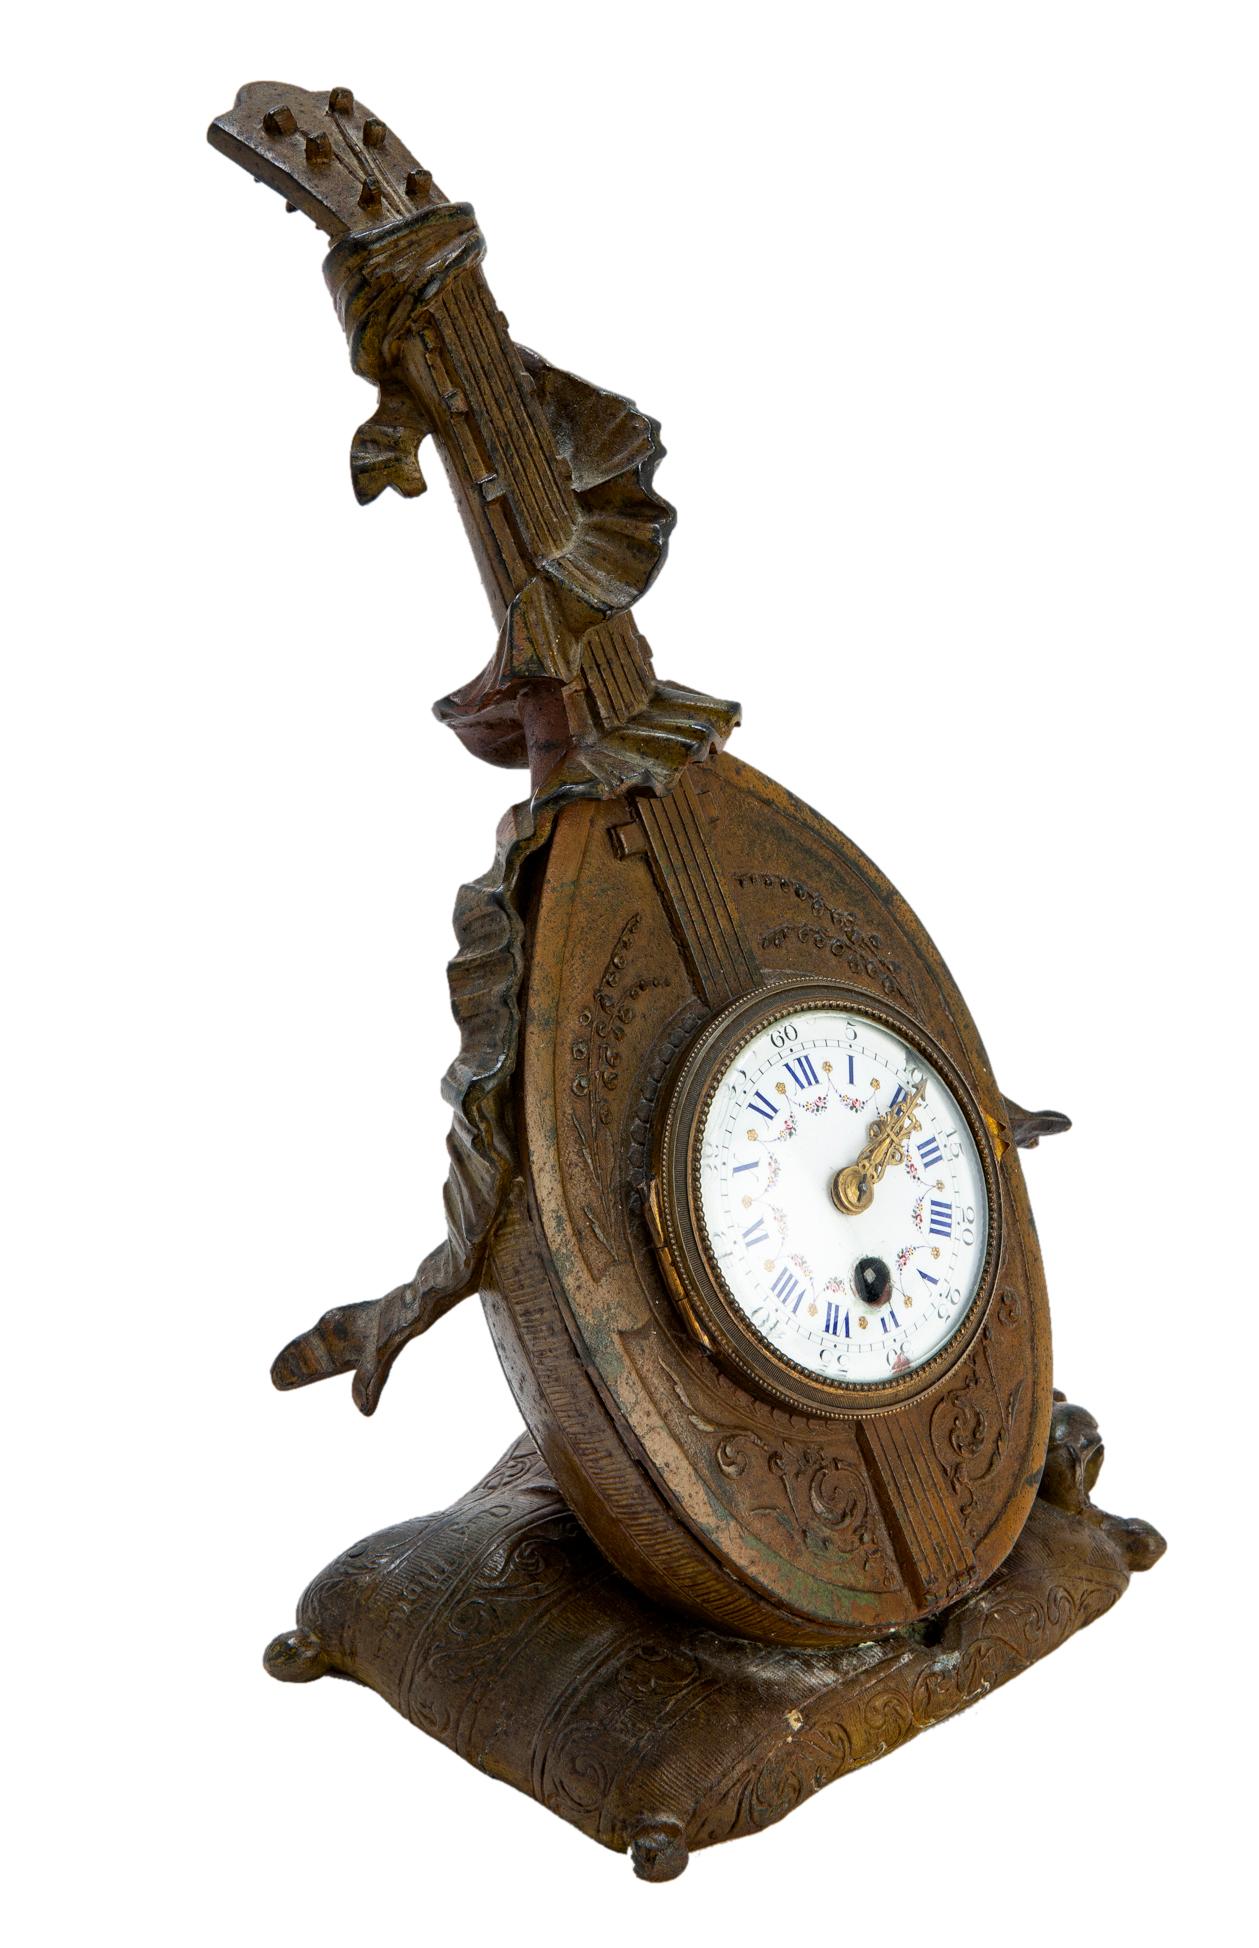 A small bronze table clock, finely hand painted porcelain face with gilt hands & accents. Most likely the bronze had been gilt when produced, but the gilding has been removed in the 